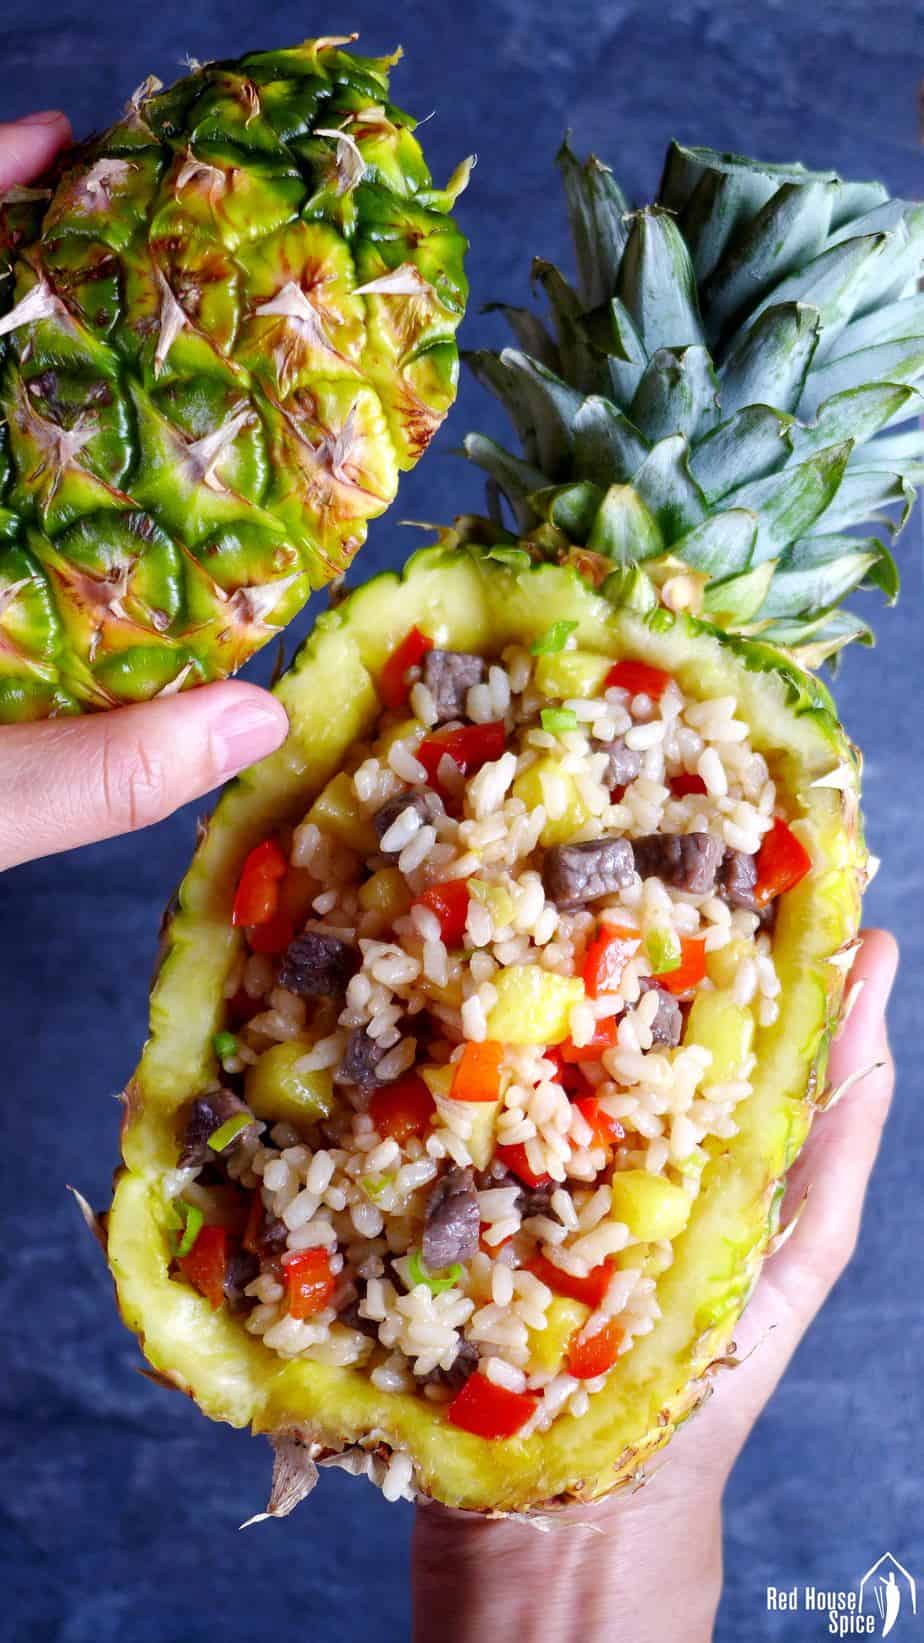 A hollowed pineapple with fried rice inside